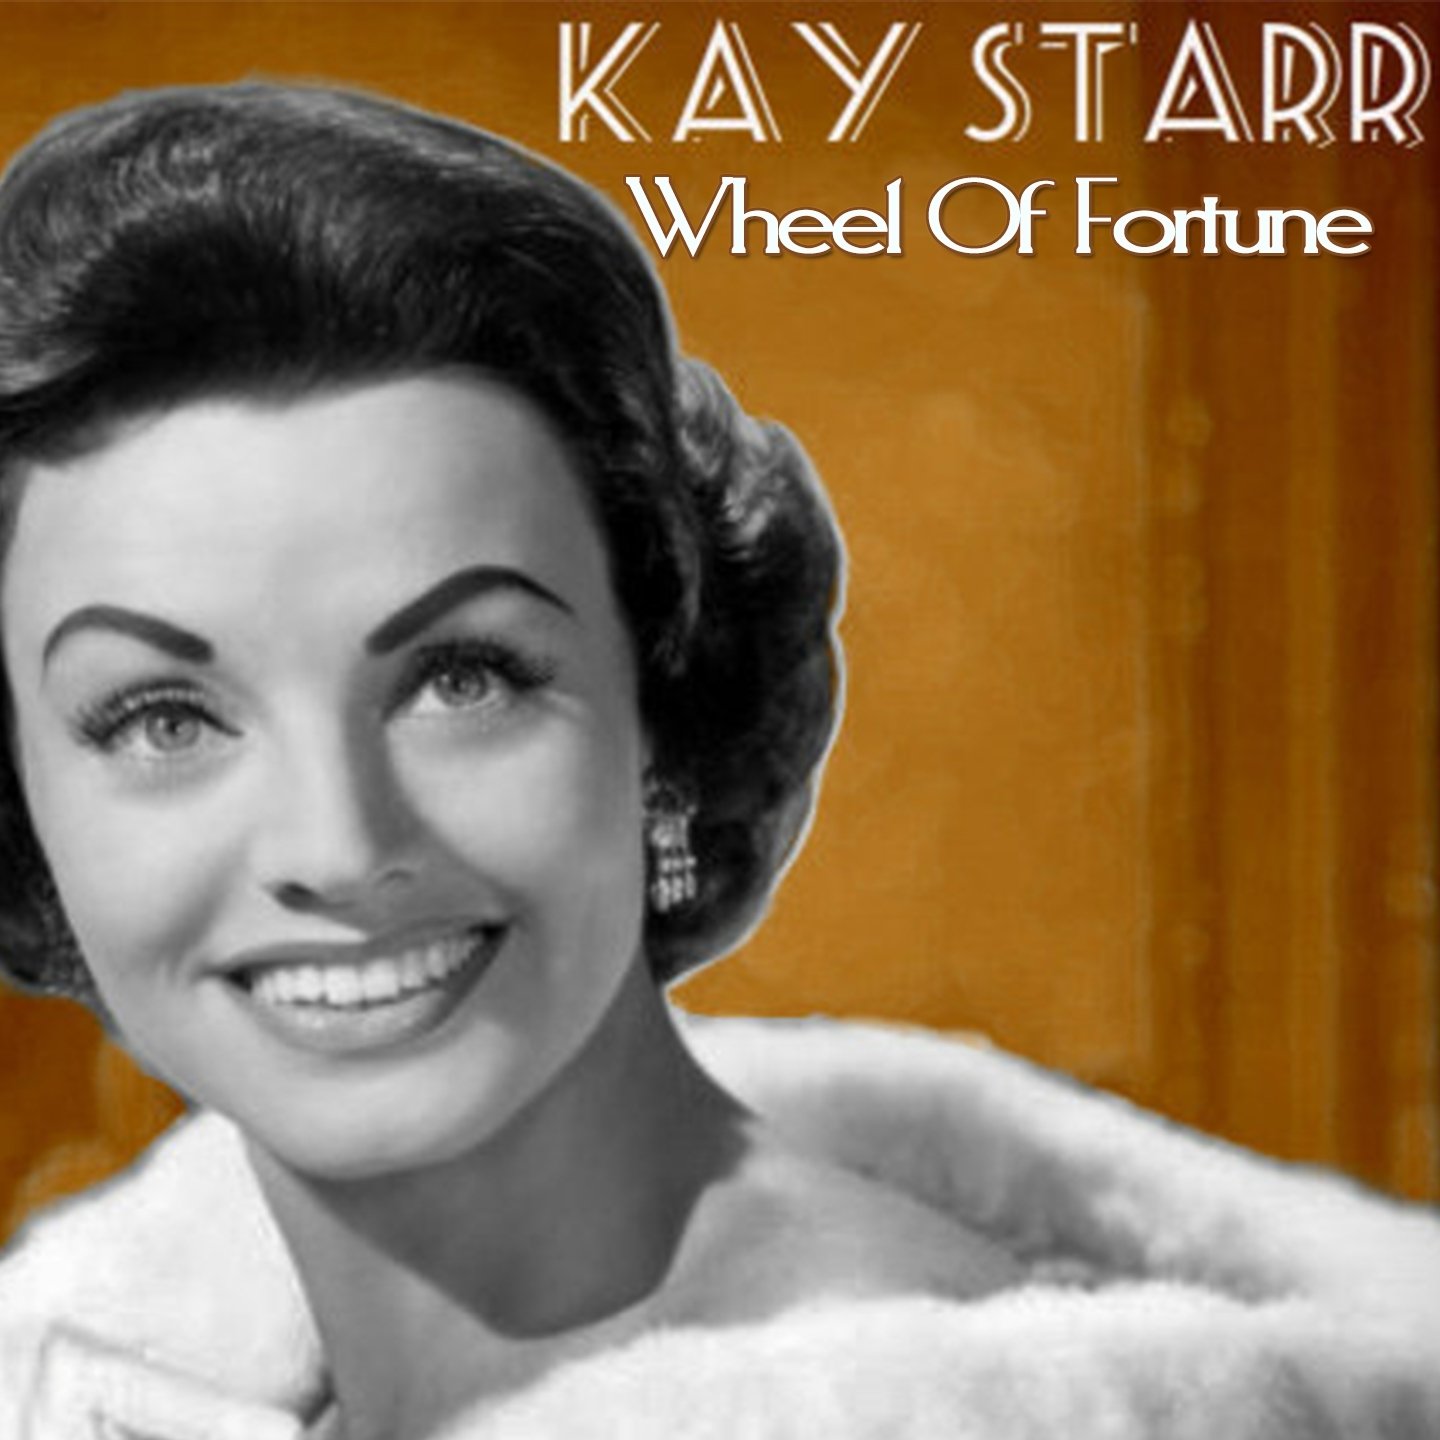 Wheel of Fortune - Kay Starr — Listen and discover music at Last.fm1440 x 1440